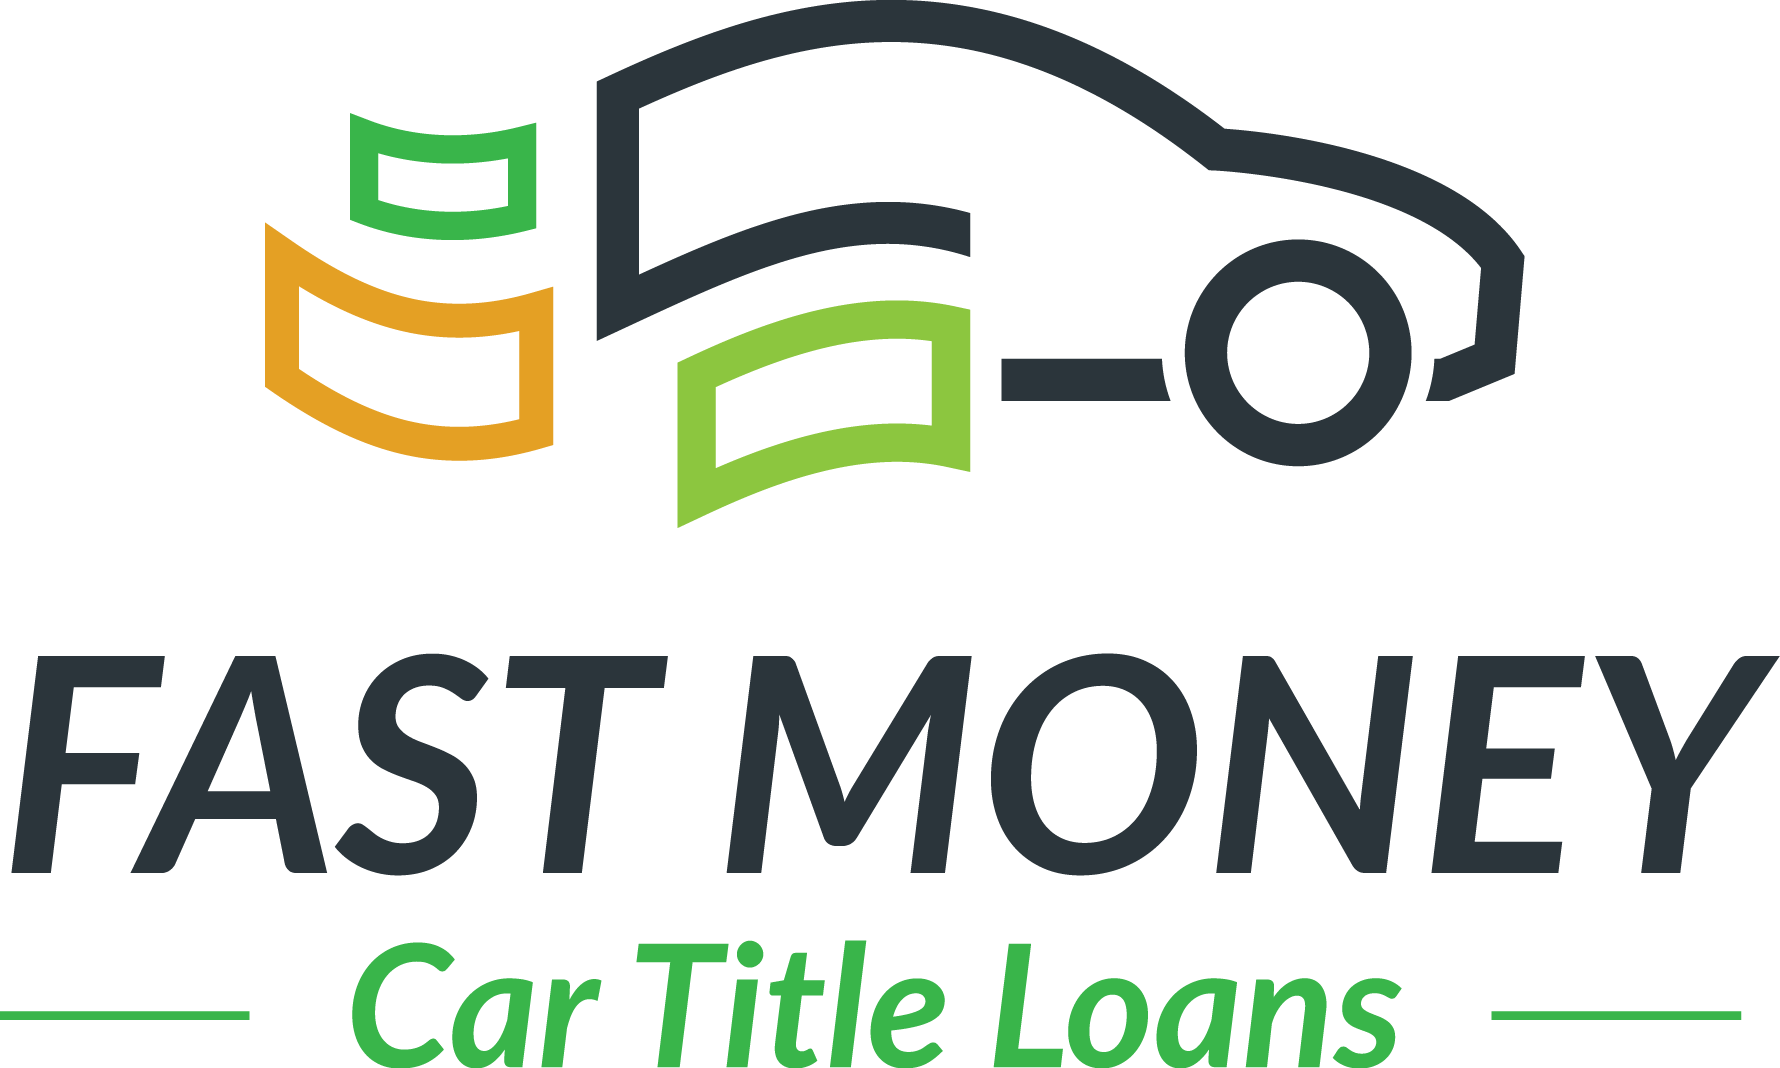 Paid Today Car Title Loans's Logo